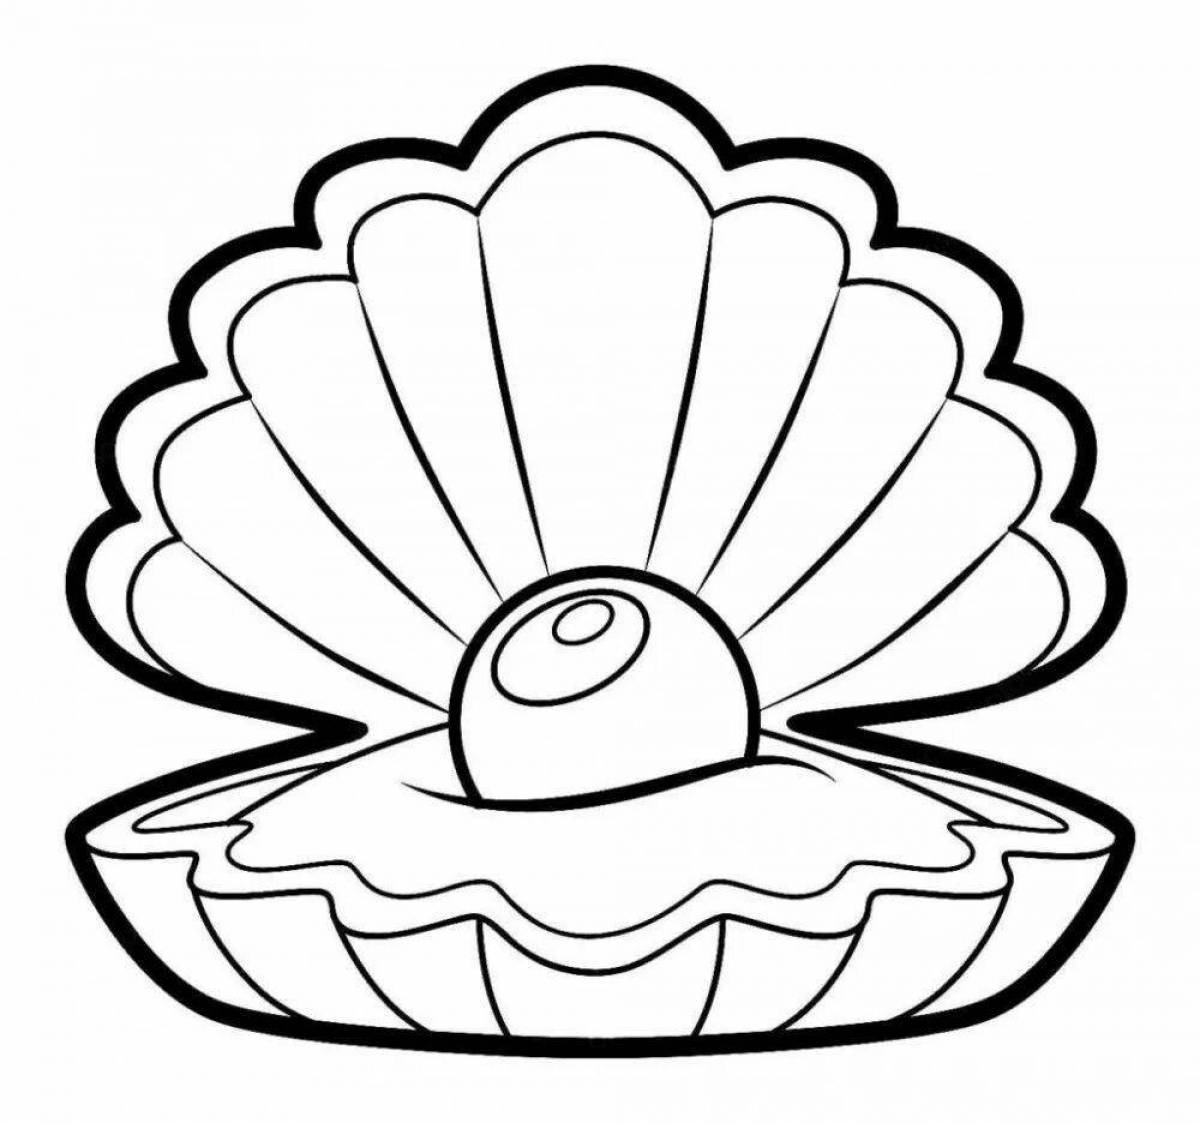 Cute shell coloring page